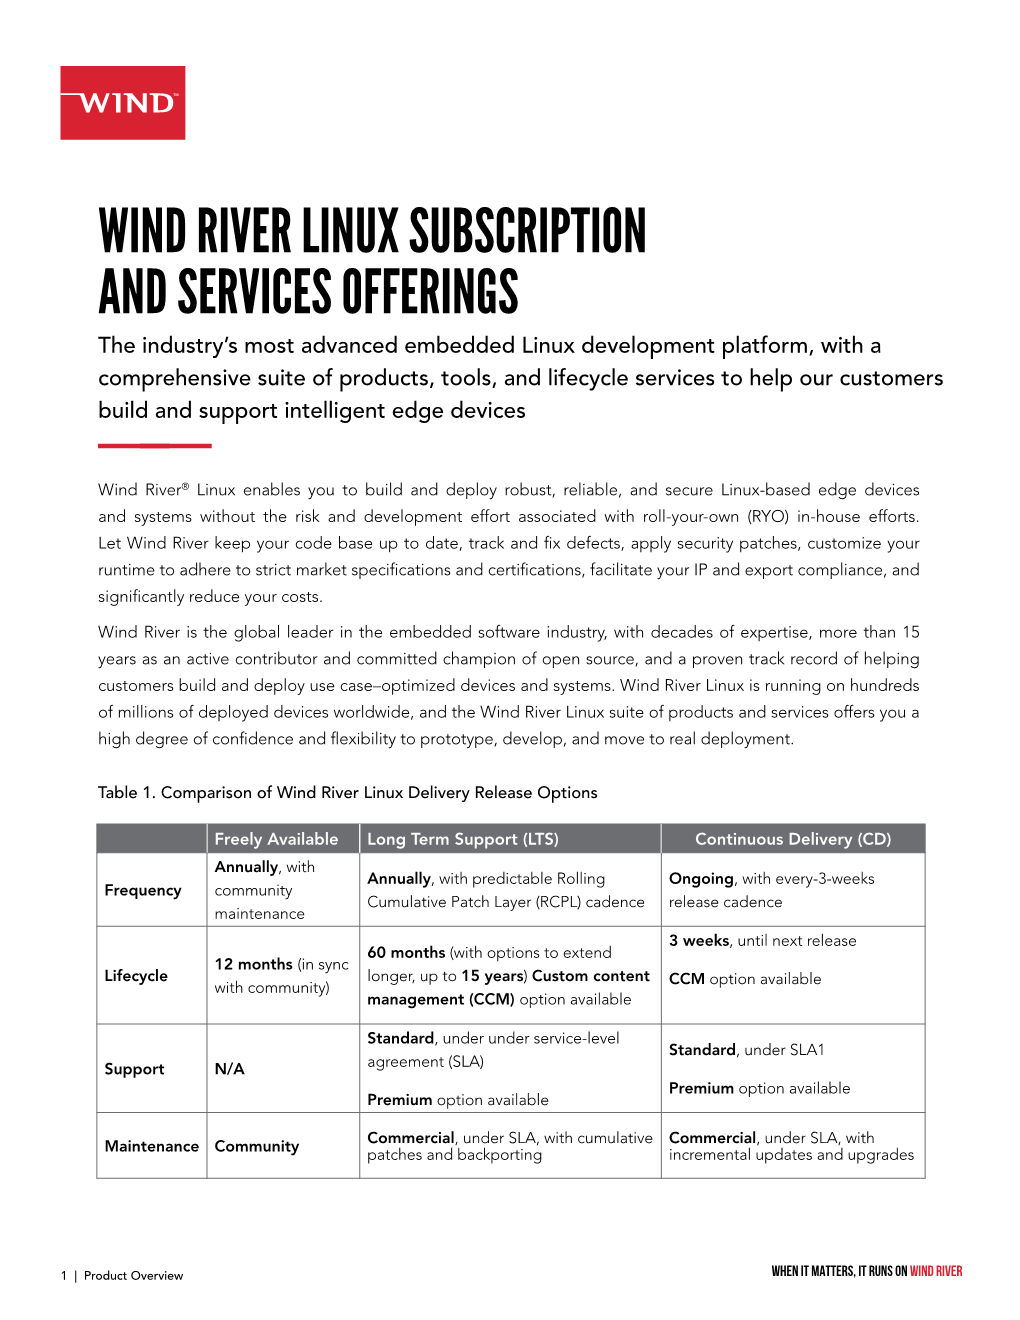 Wind River Linux Subscription and Services Offerings